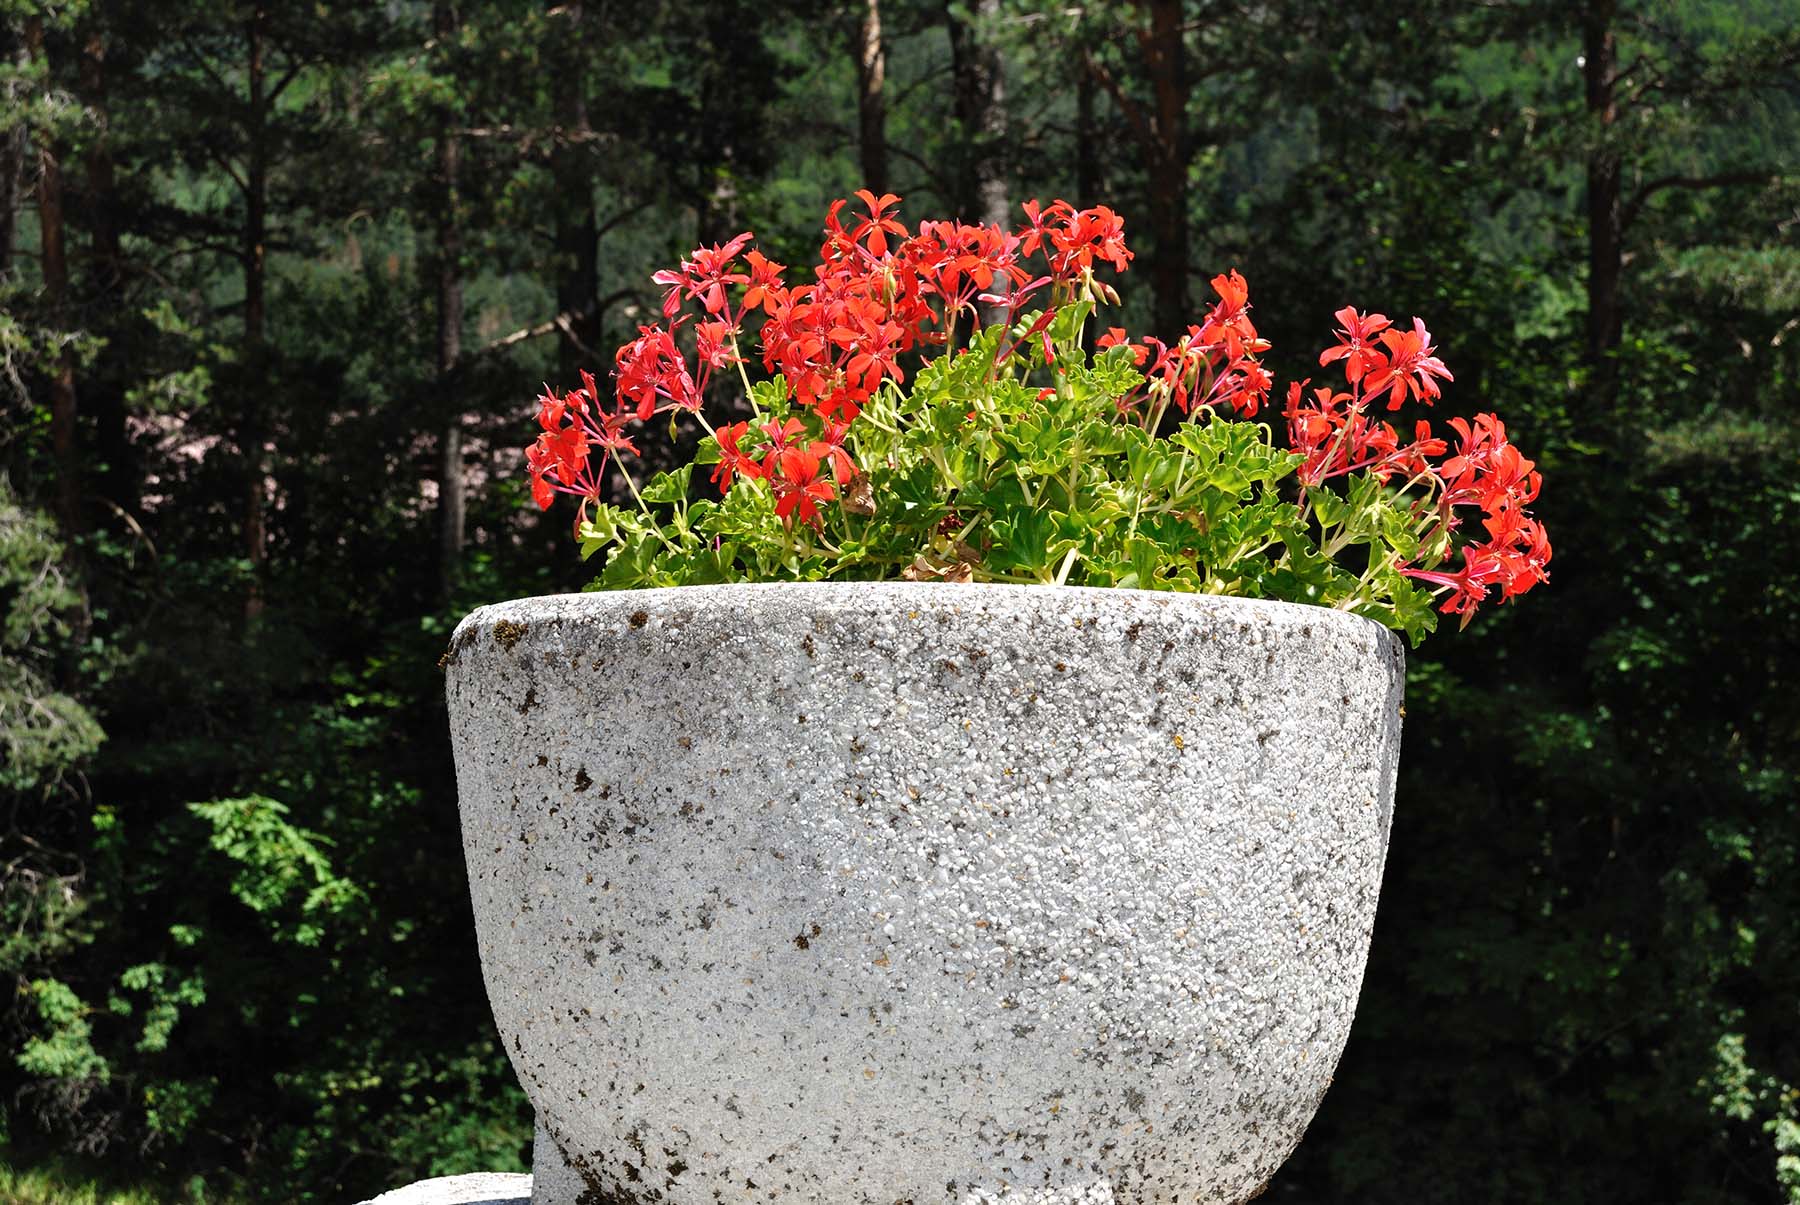 DIY Concrete Planters: Adding Greenery and Elegance to Your Outdoor Decor